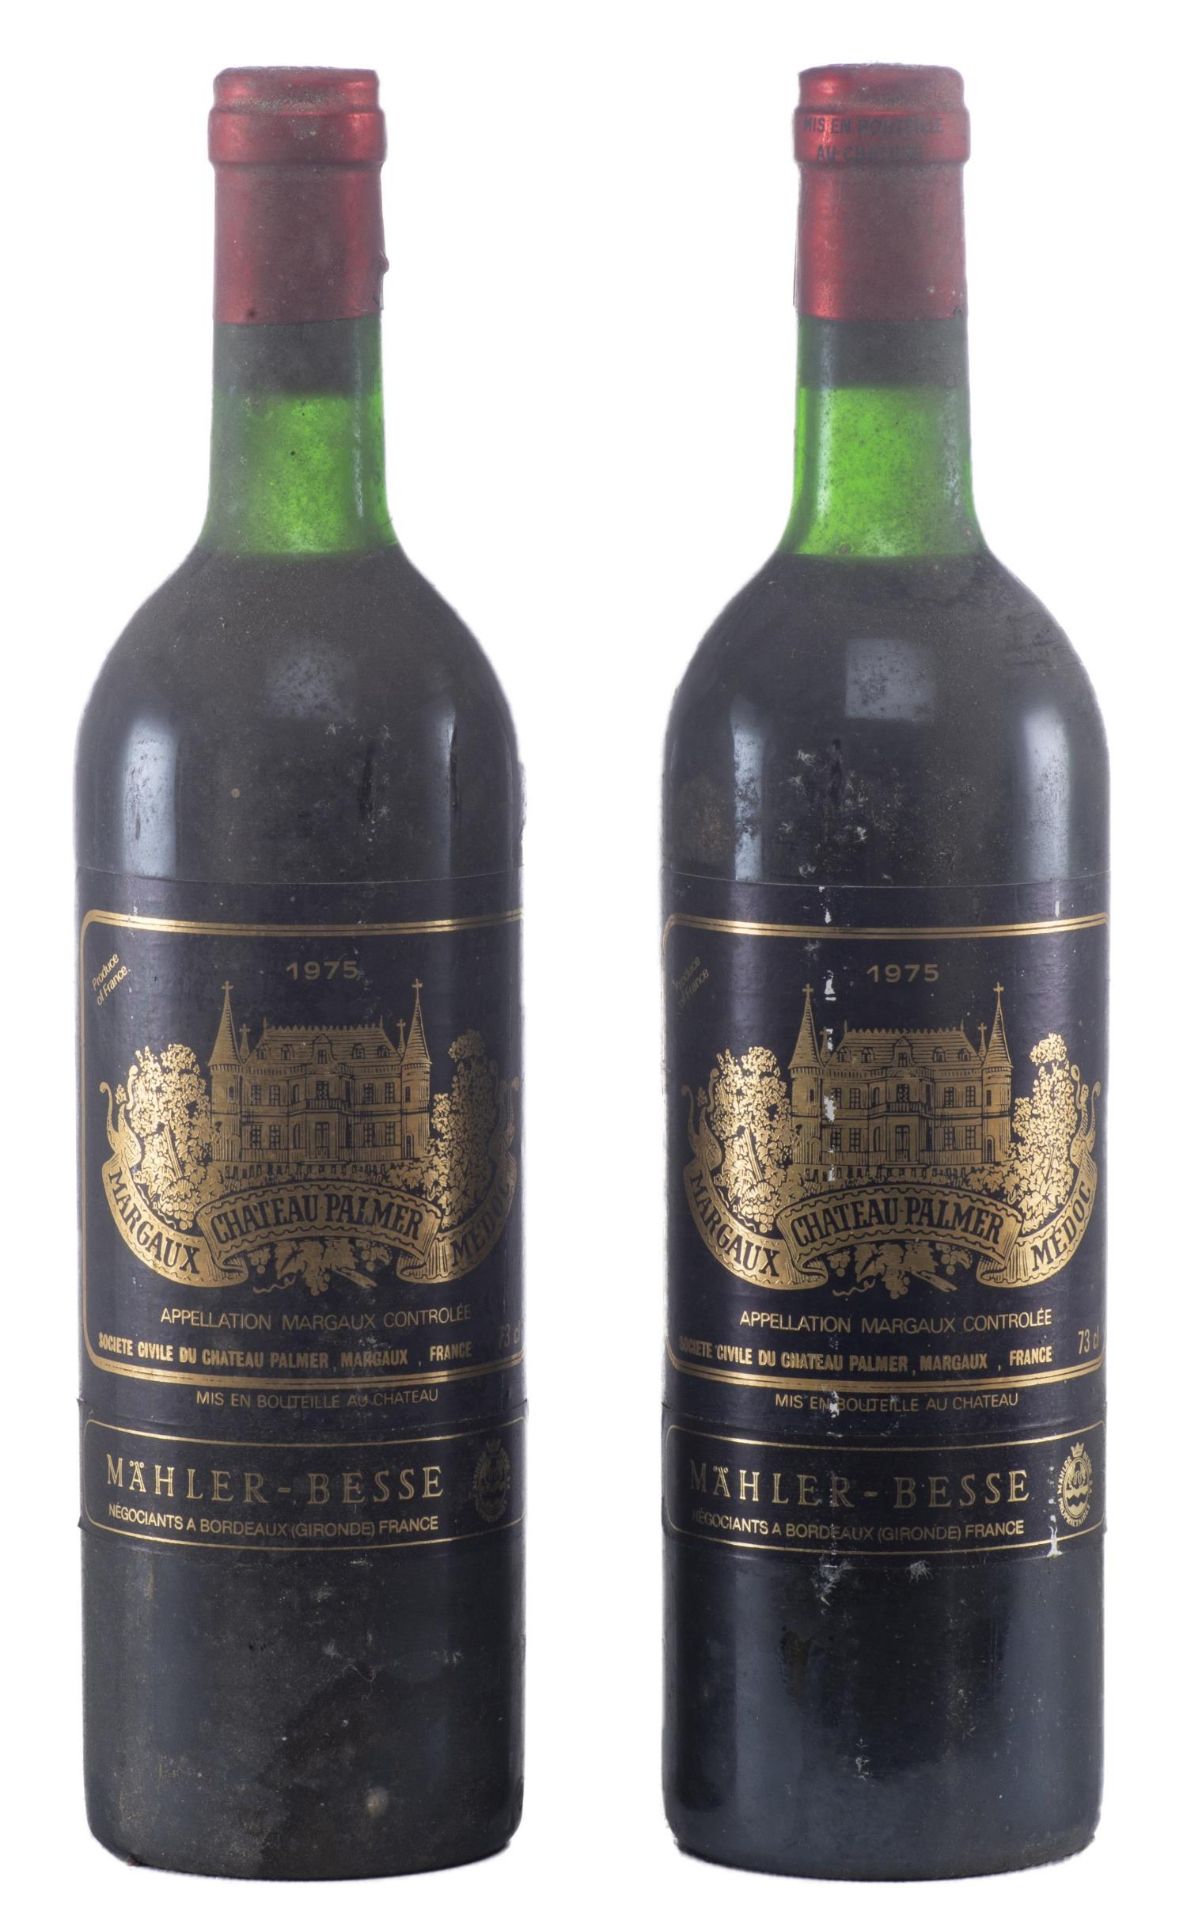 Château Palmer, Margaux, 1975 - Image 2 of 4